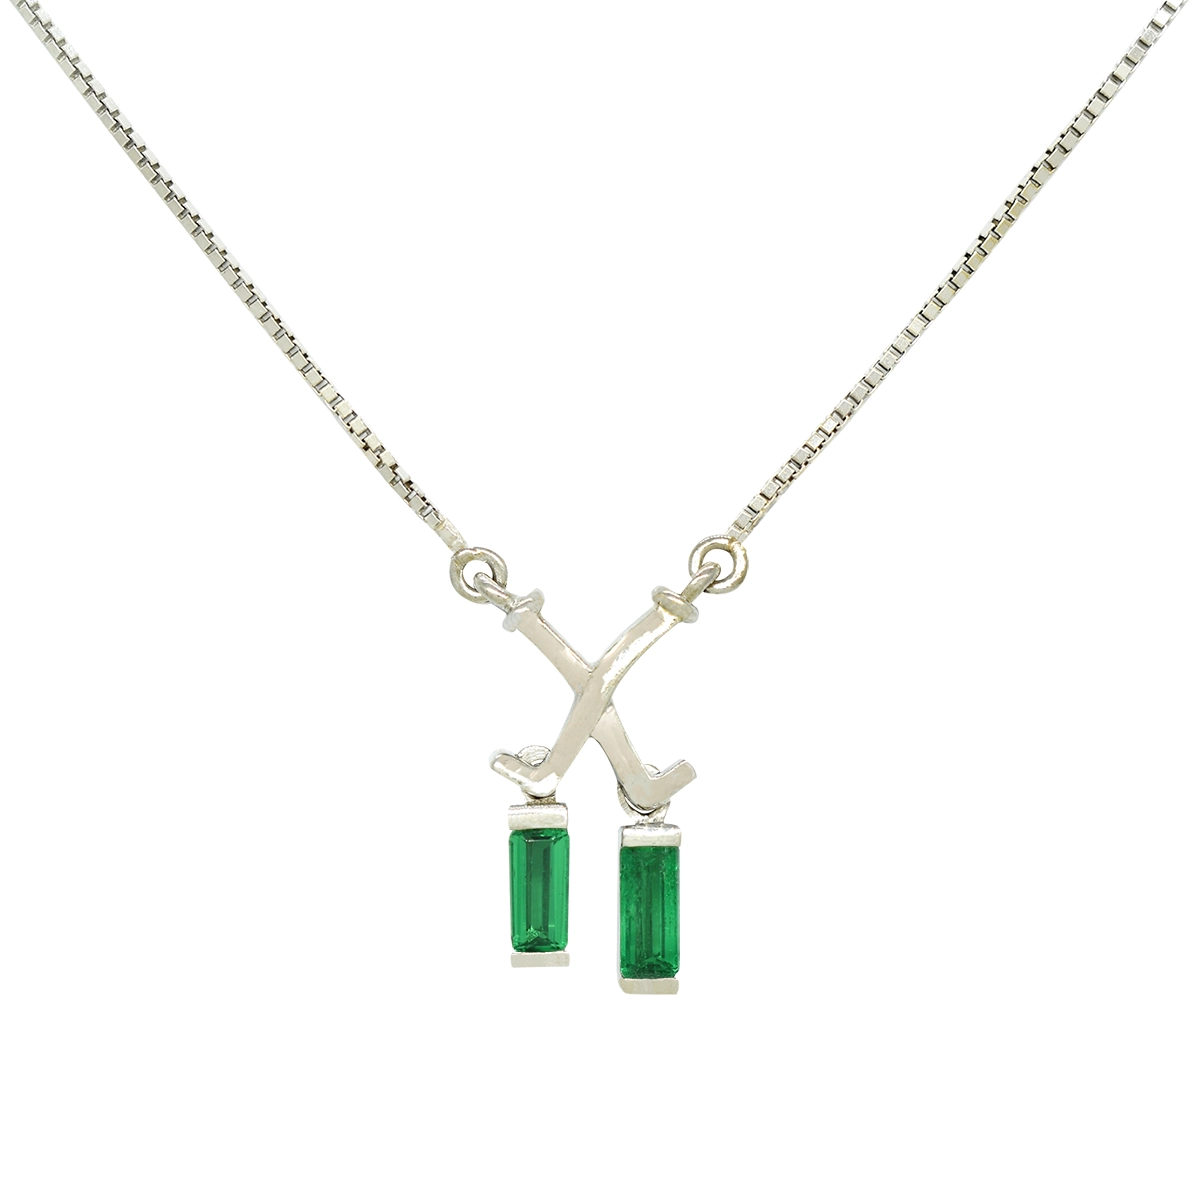 emerald-necklace-in-18k-white-gold-with-2-baguette-cut-natural-colombian-emeralds